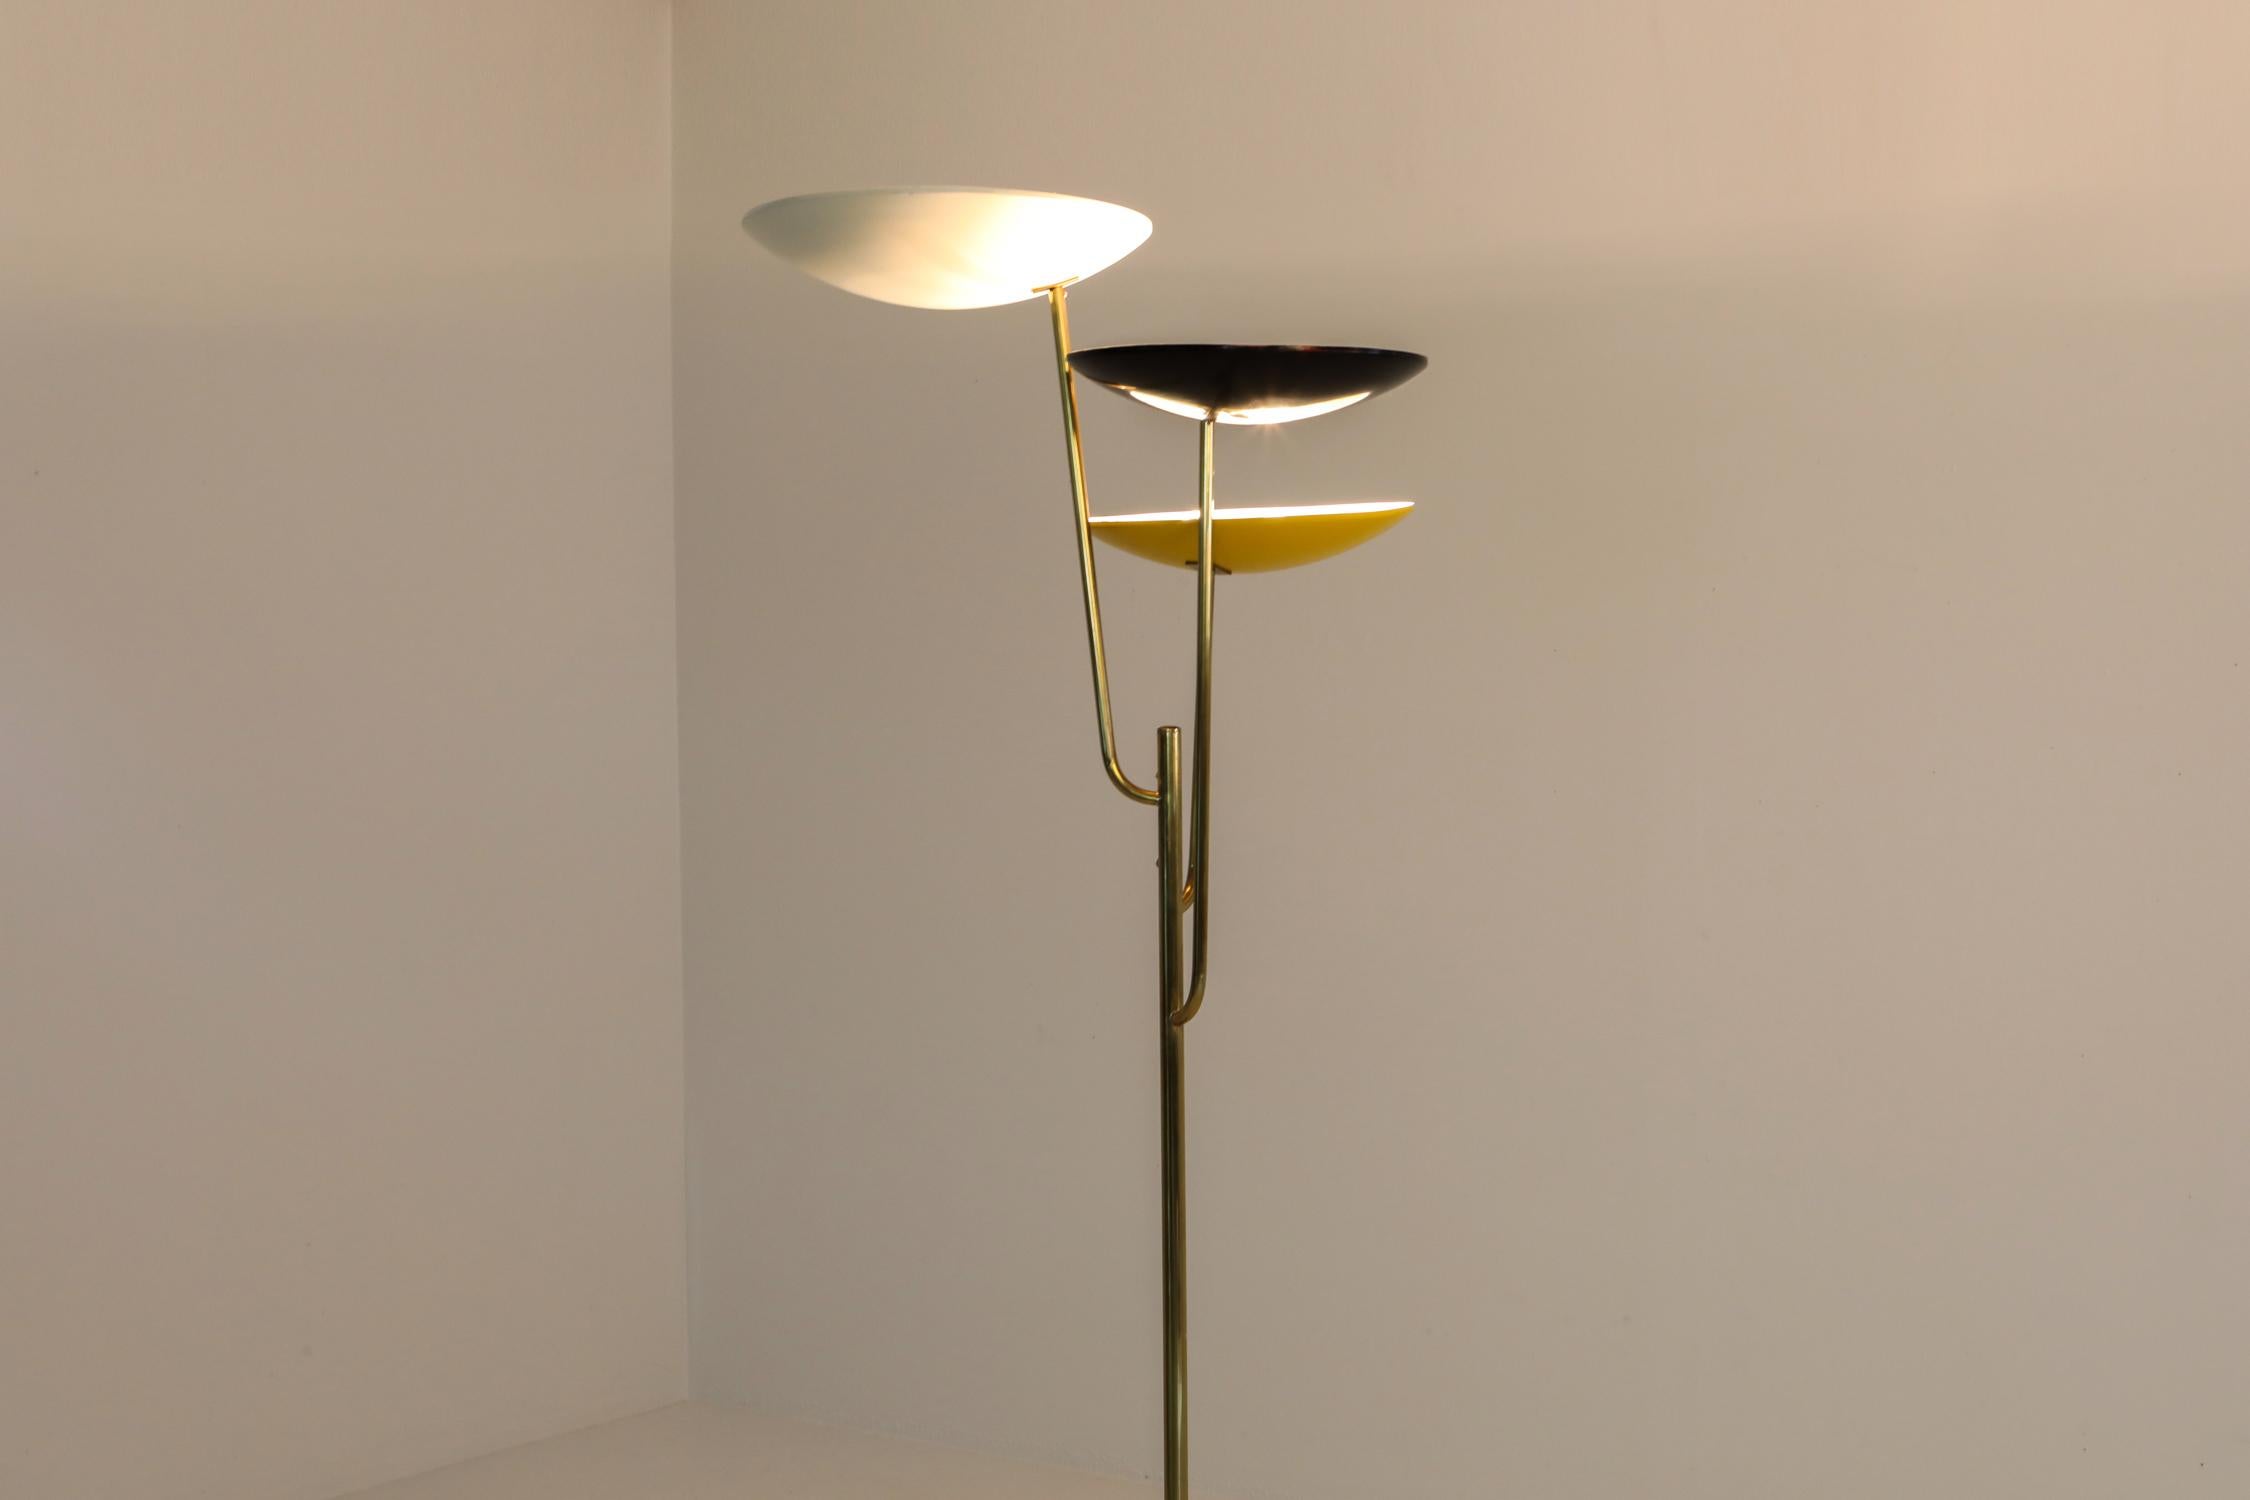 Italian Floor Lamp 1950s Style with a White, Yellow and Black Shade 1